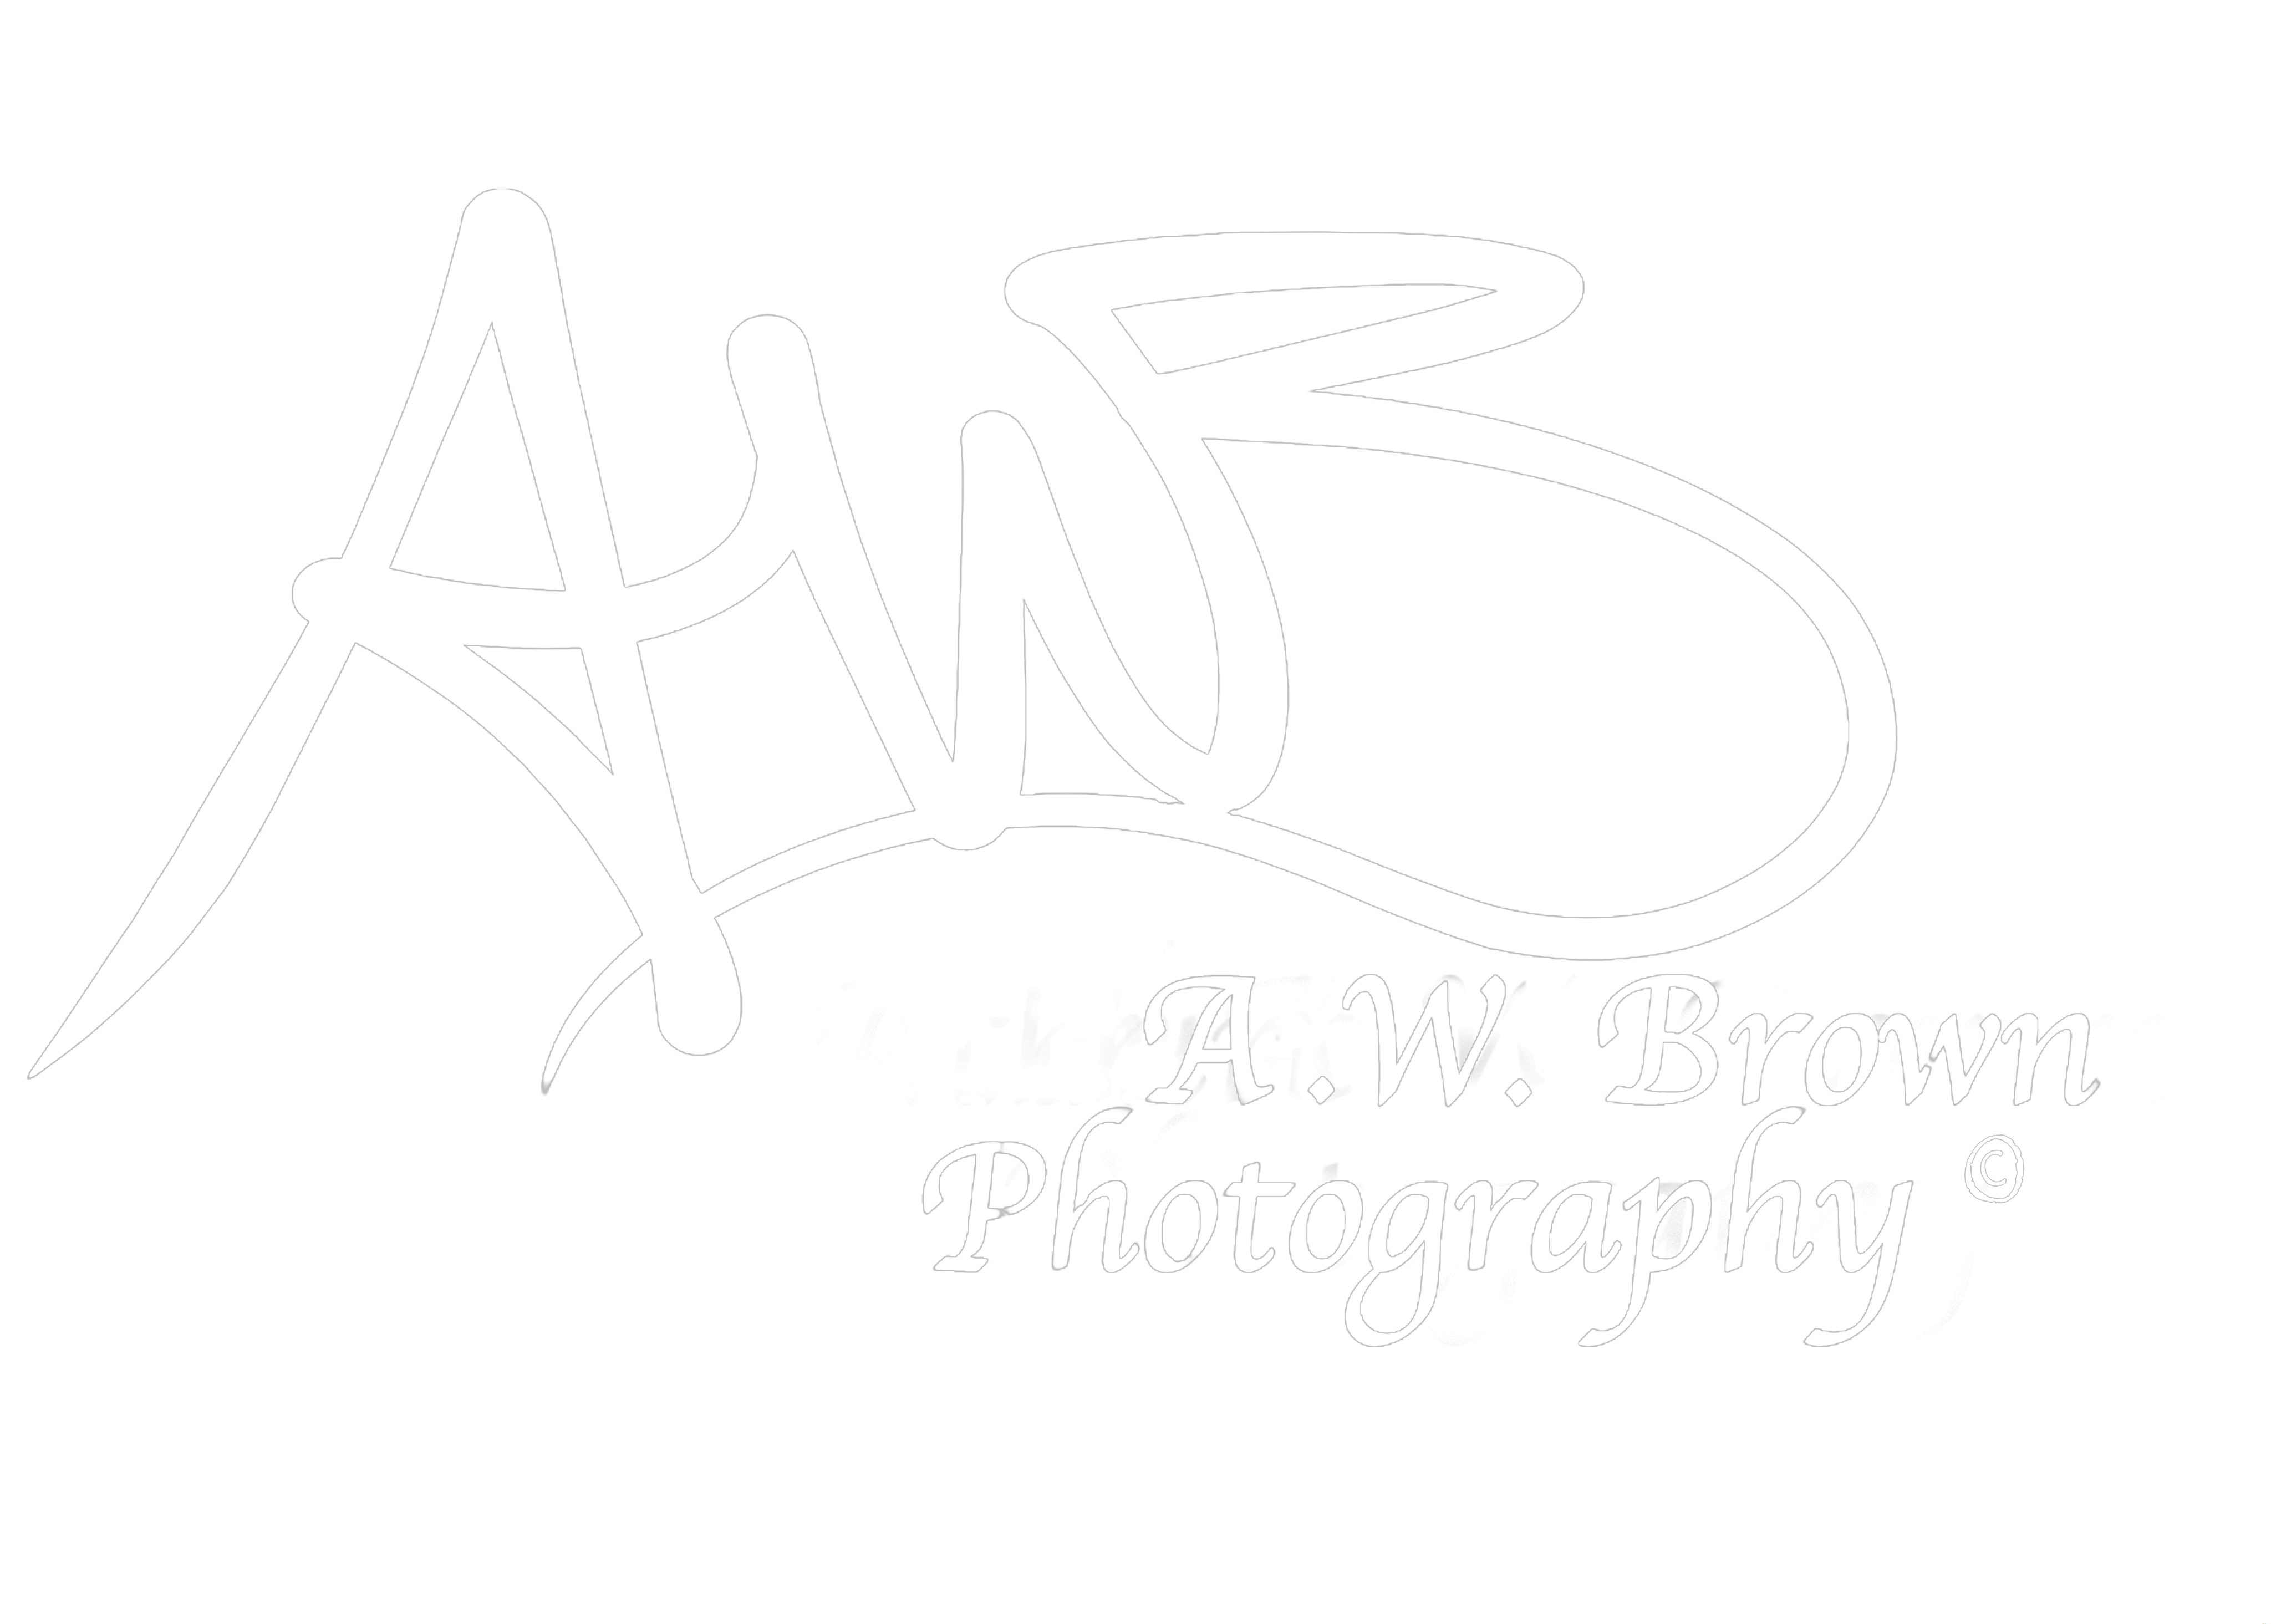 A W Brown Photography